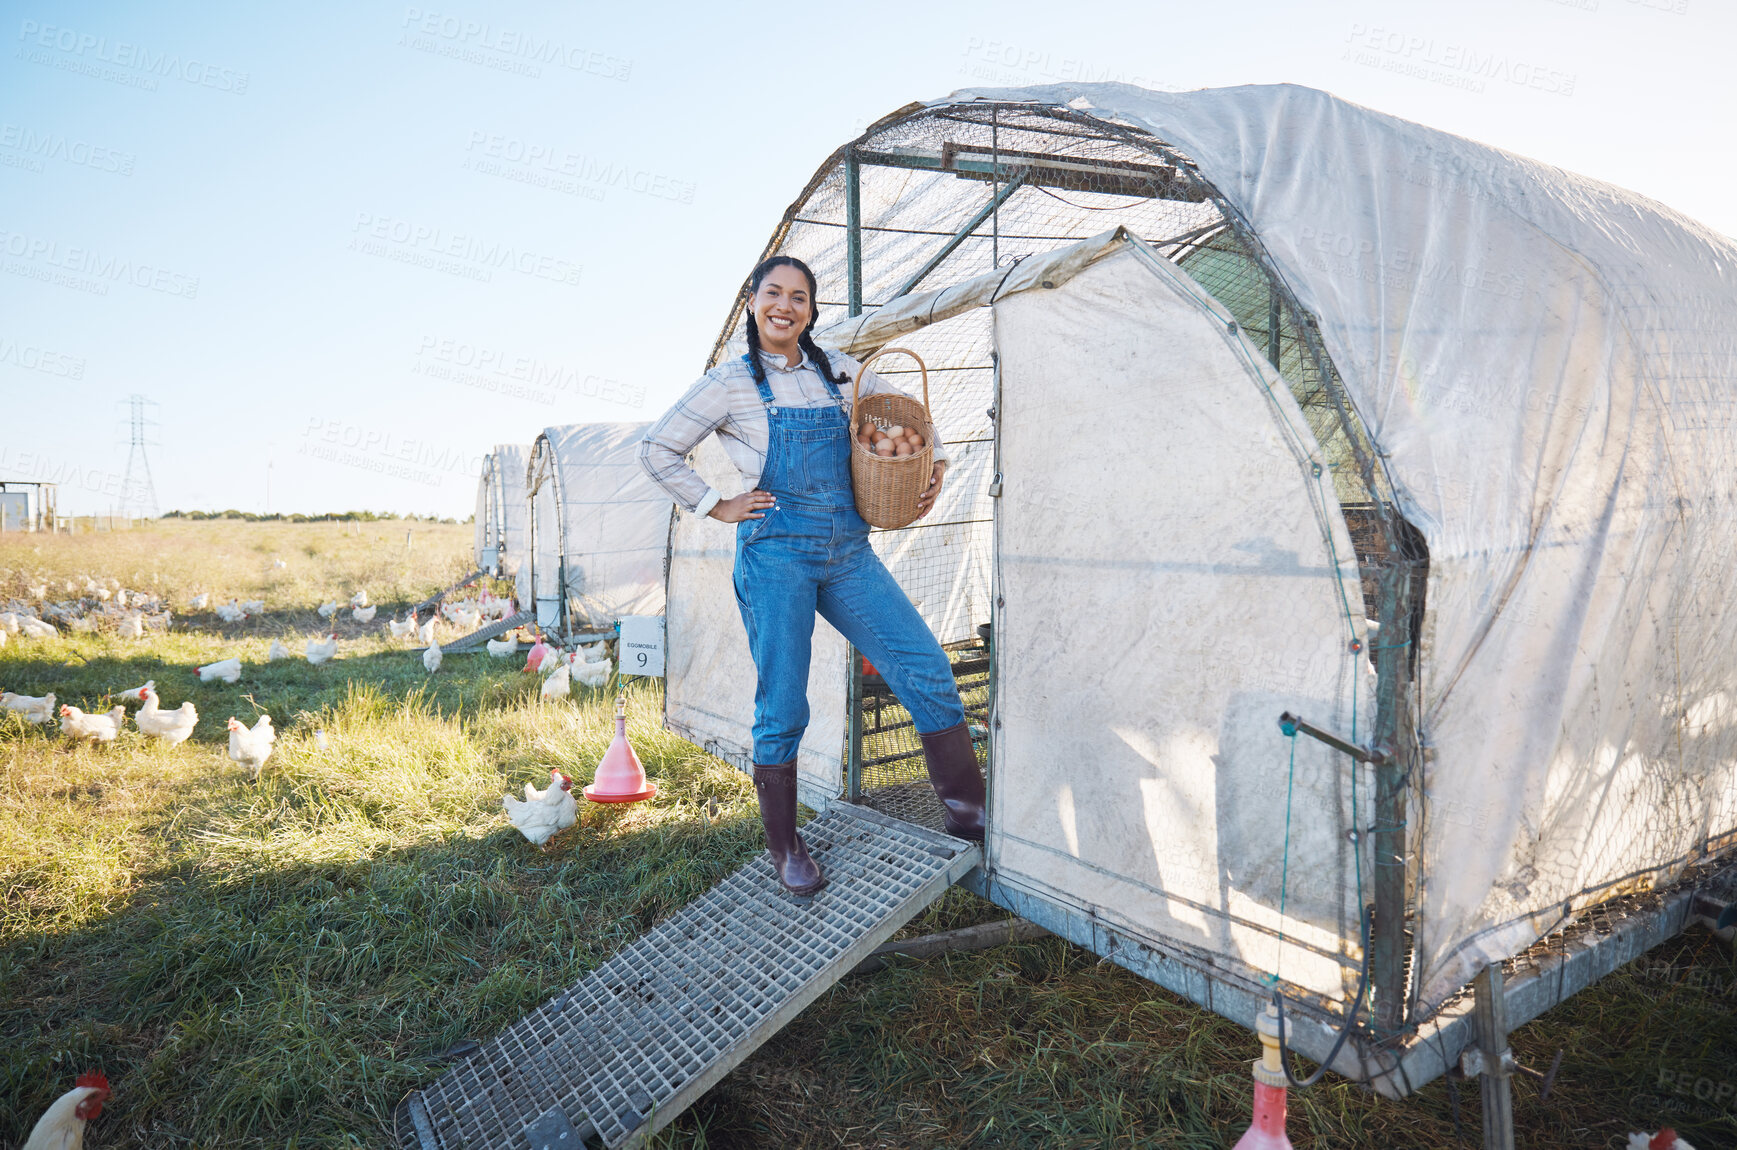 Buy stock photo Chicken farming, happy woman with eggs in basket, coop and sunshine in countryside greenhouse with sustainable business. Agriculture, poultry farm and farmer with smile, food and animals in nature.